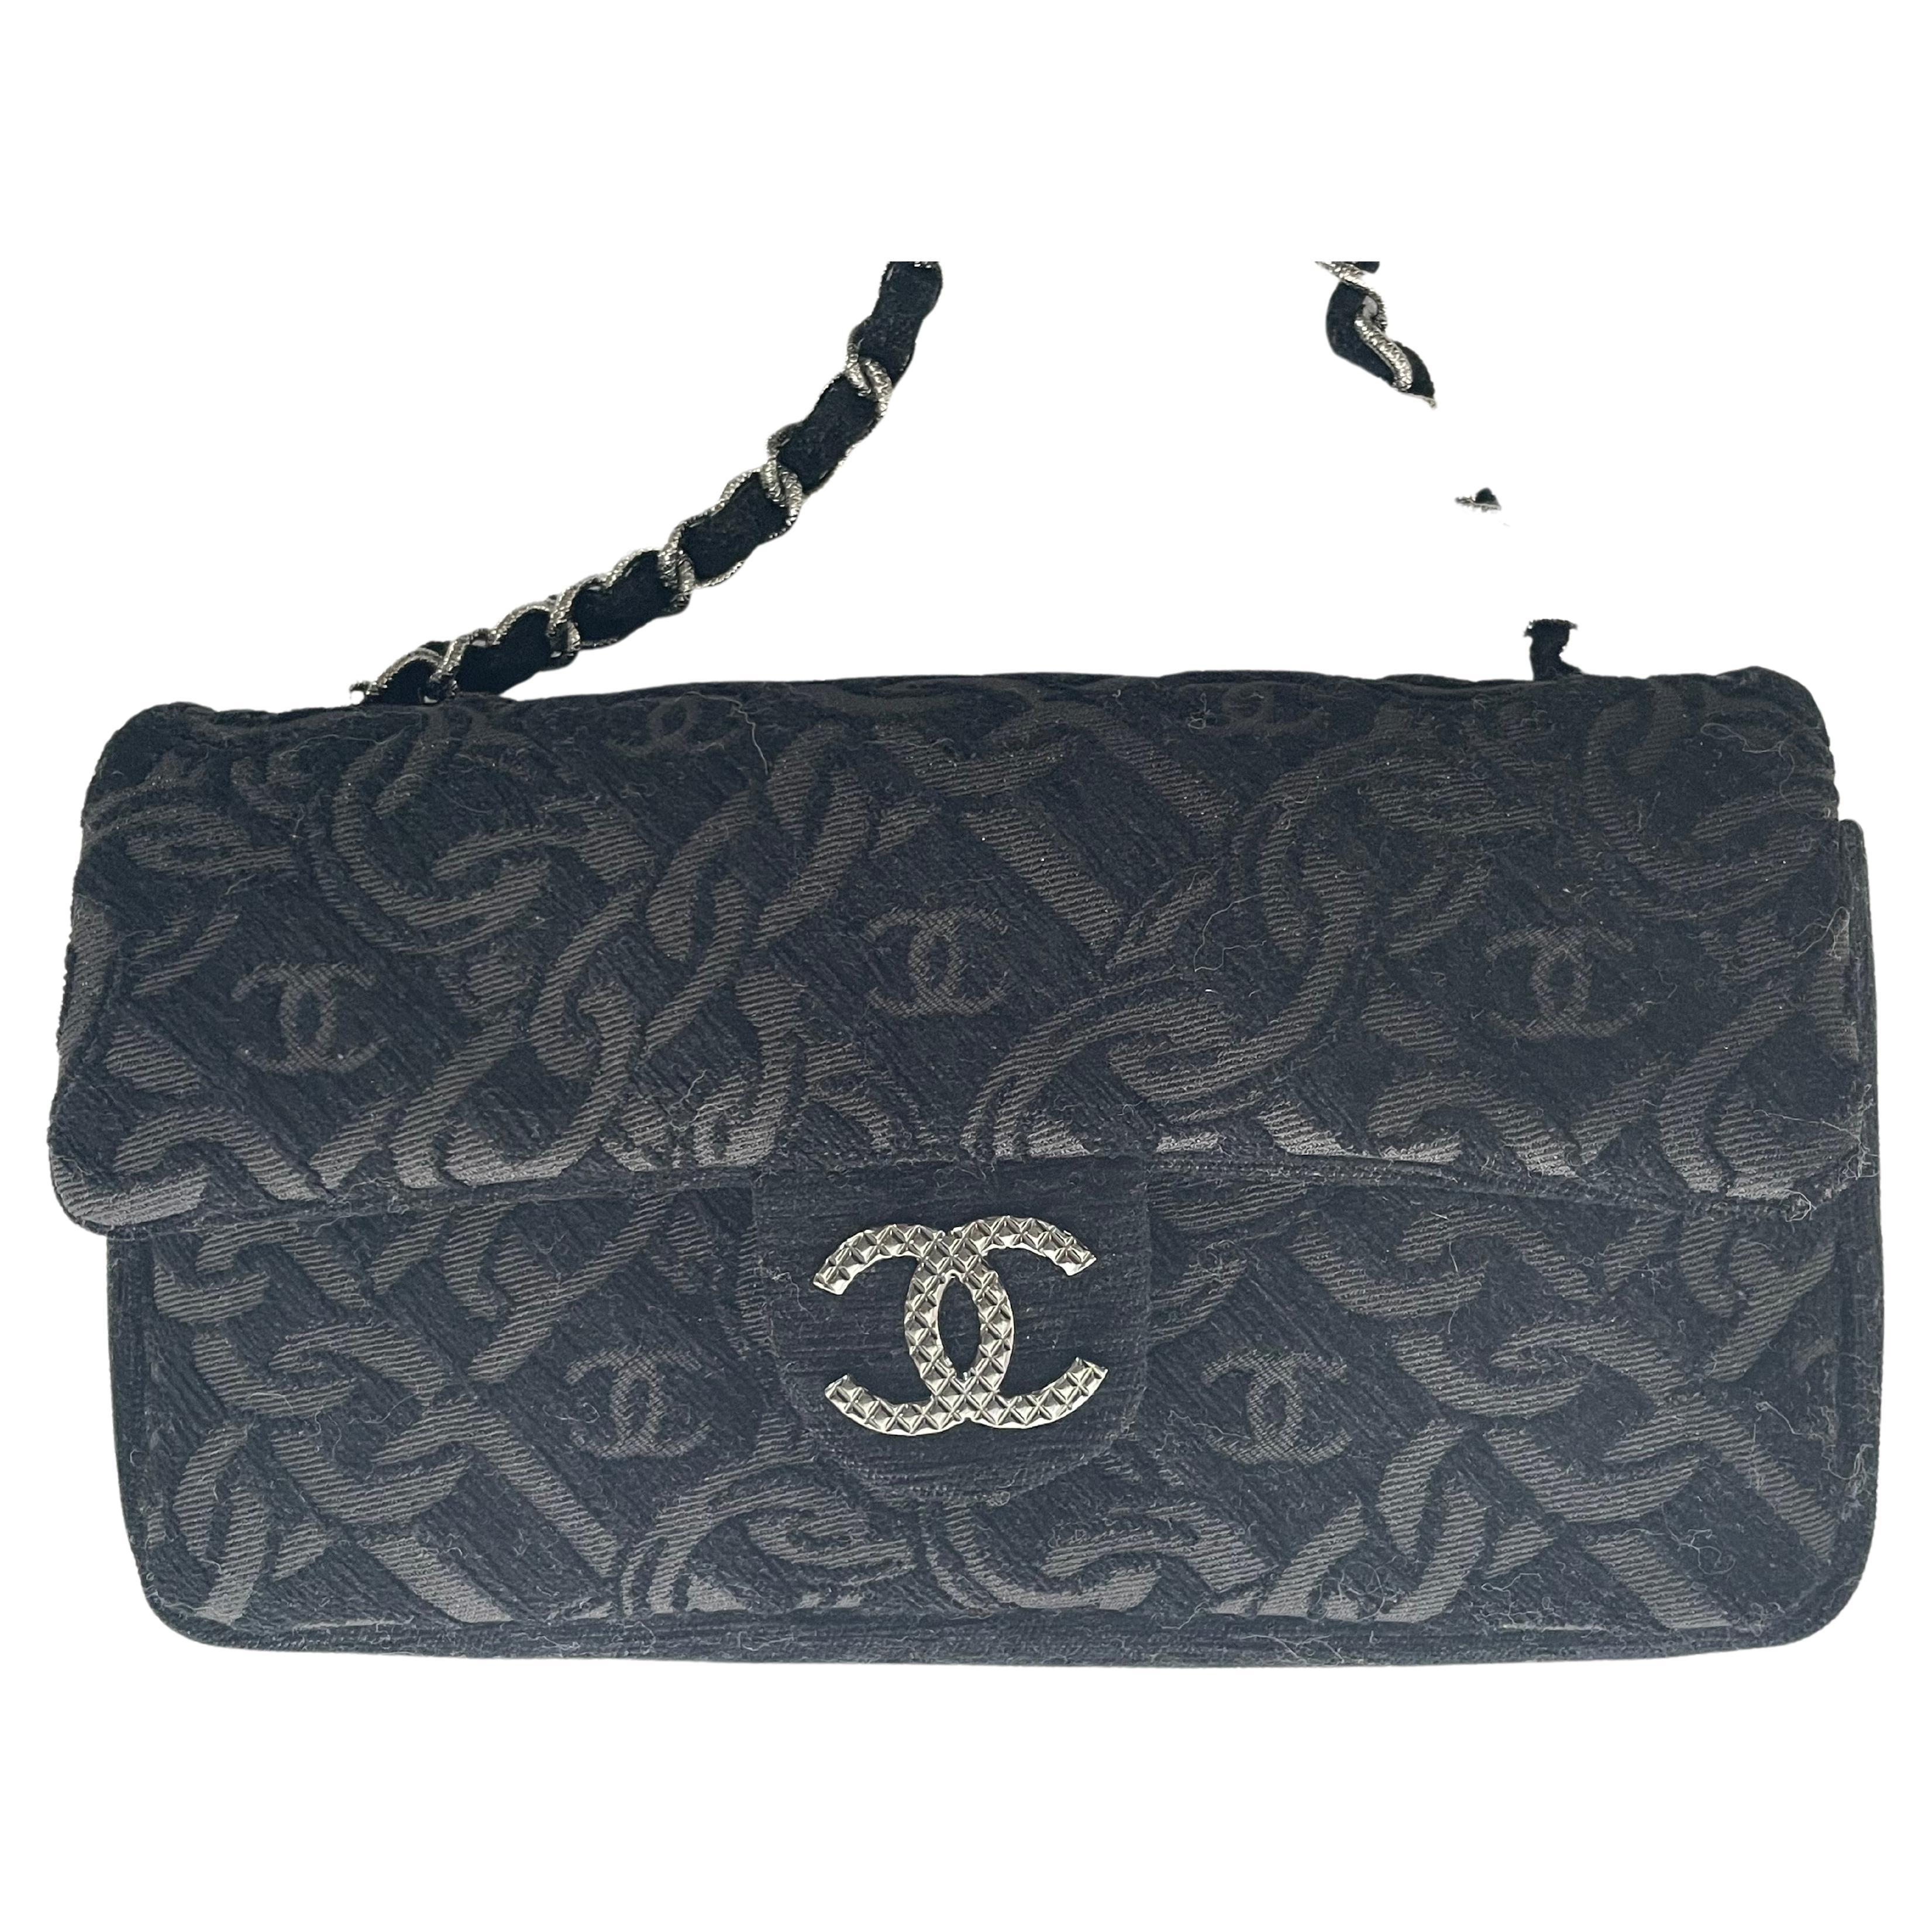 About
Black Chanel evening bag of black Jacquard fabric with woven Chanel chains and CC log. CC lock and chain in silver metal.
Measurement 
Bag length    25cm
Bag height    14 cm 
Bag deep      5 cm 
Chain length 51 cm, wide 1,5 cm 
Features
- 100